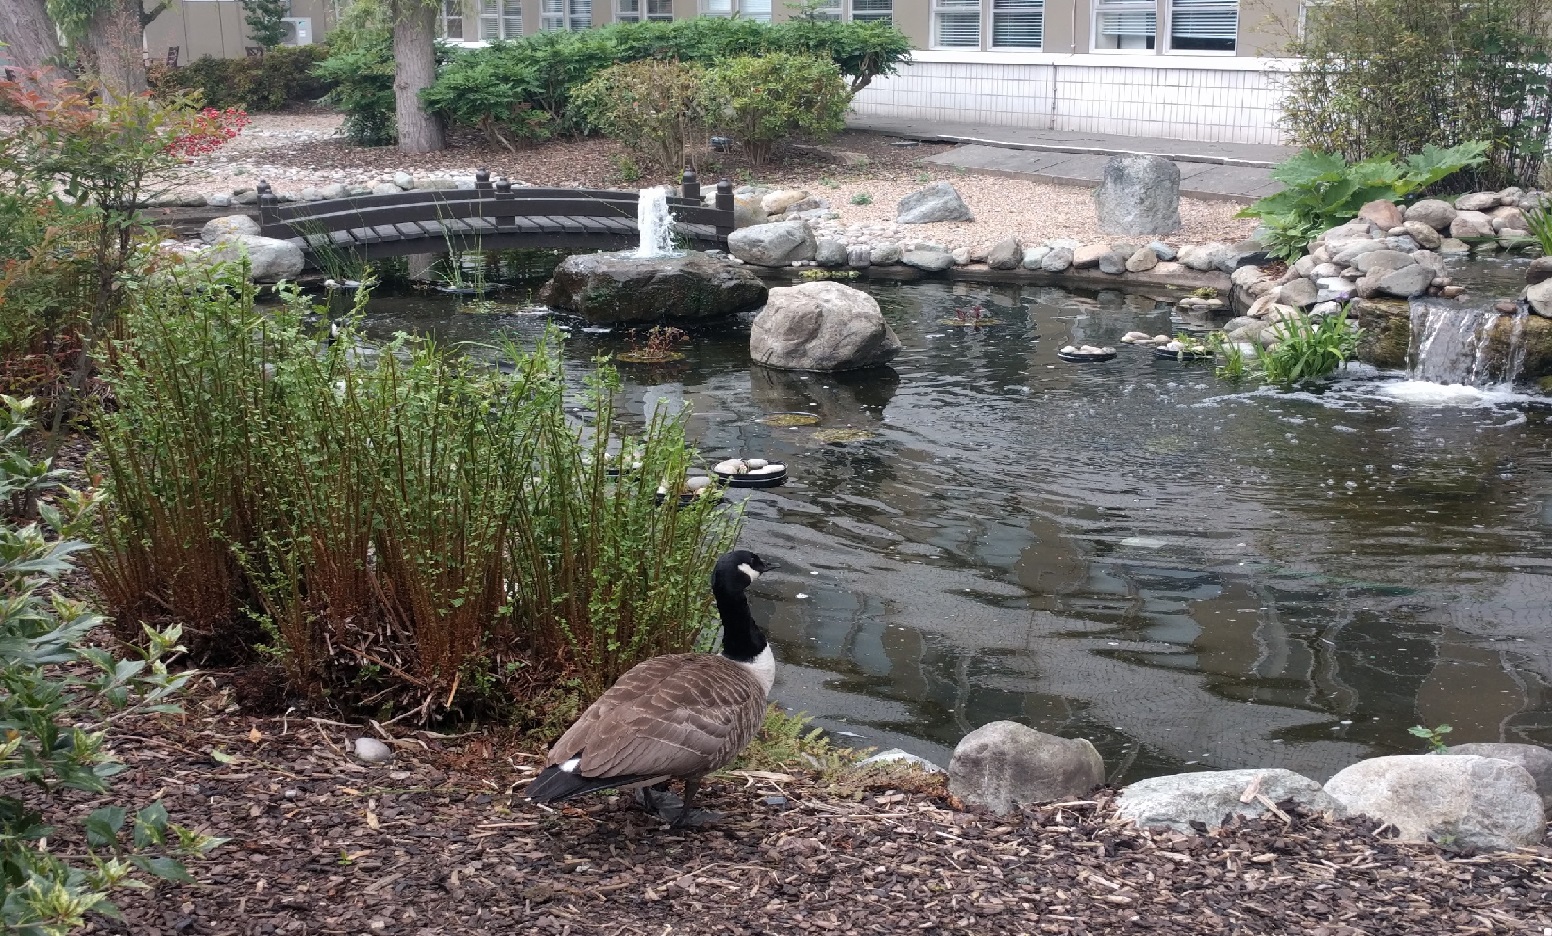 Goose shot dead after first year falls into humanities pond